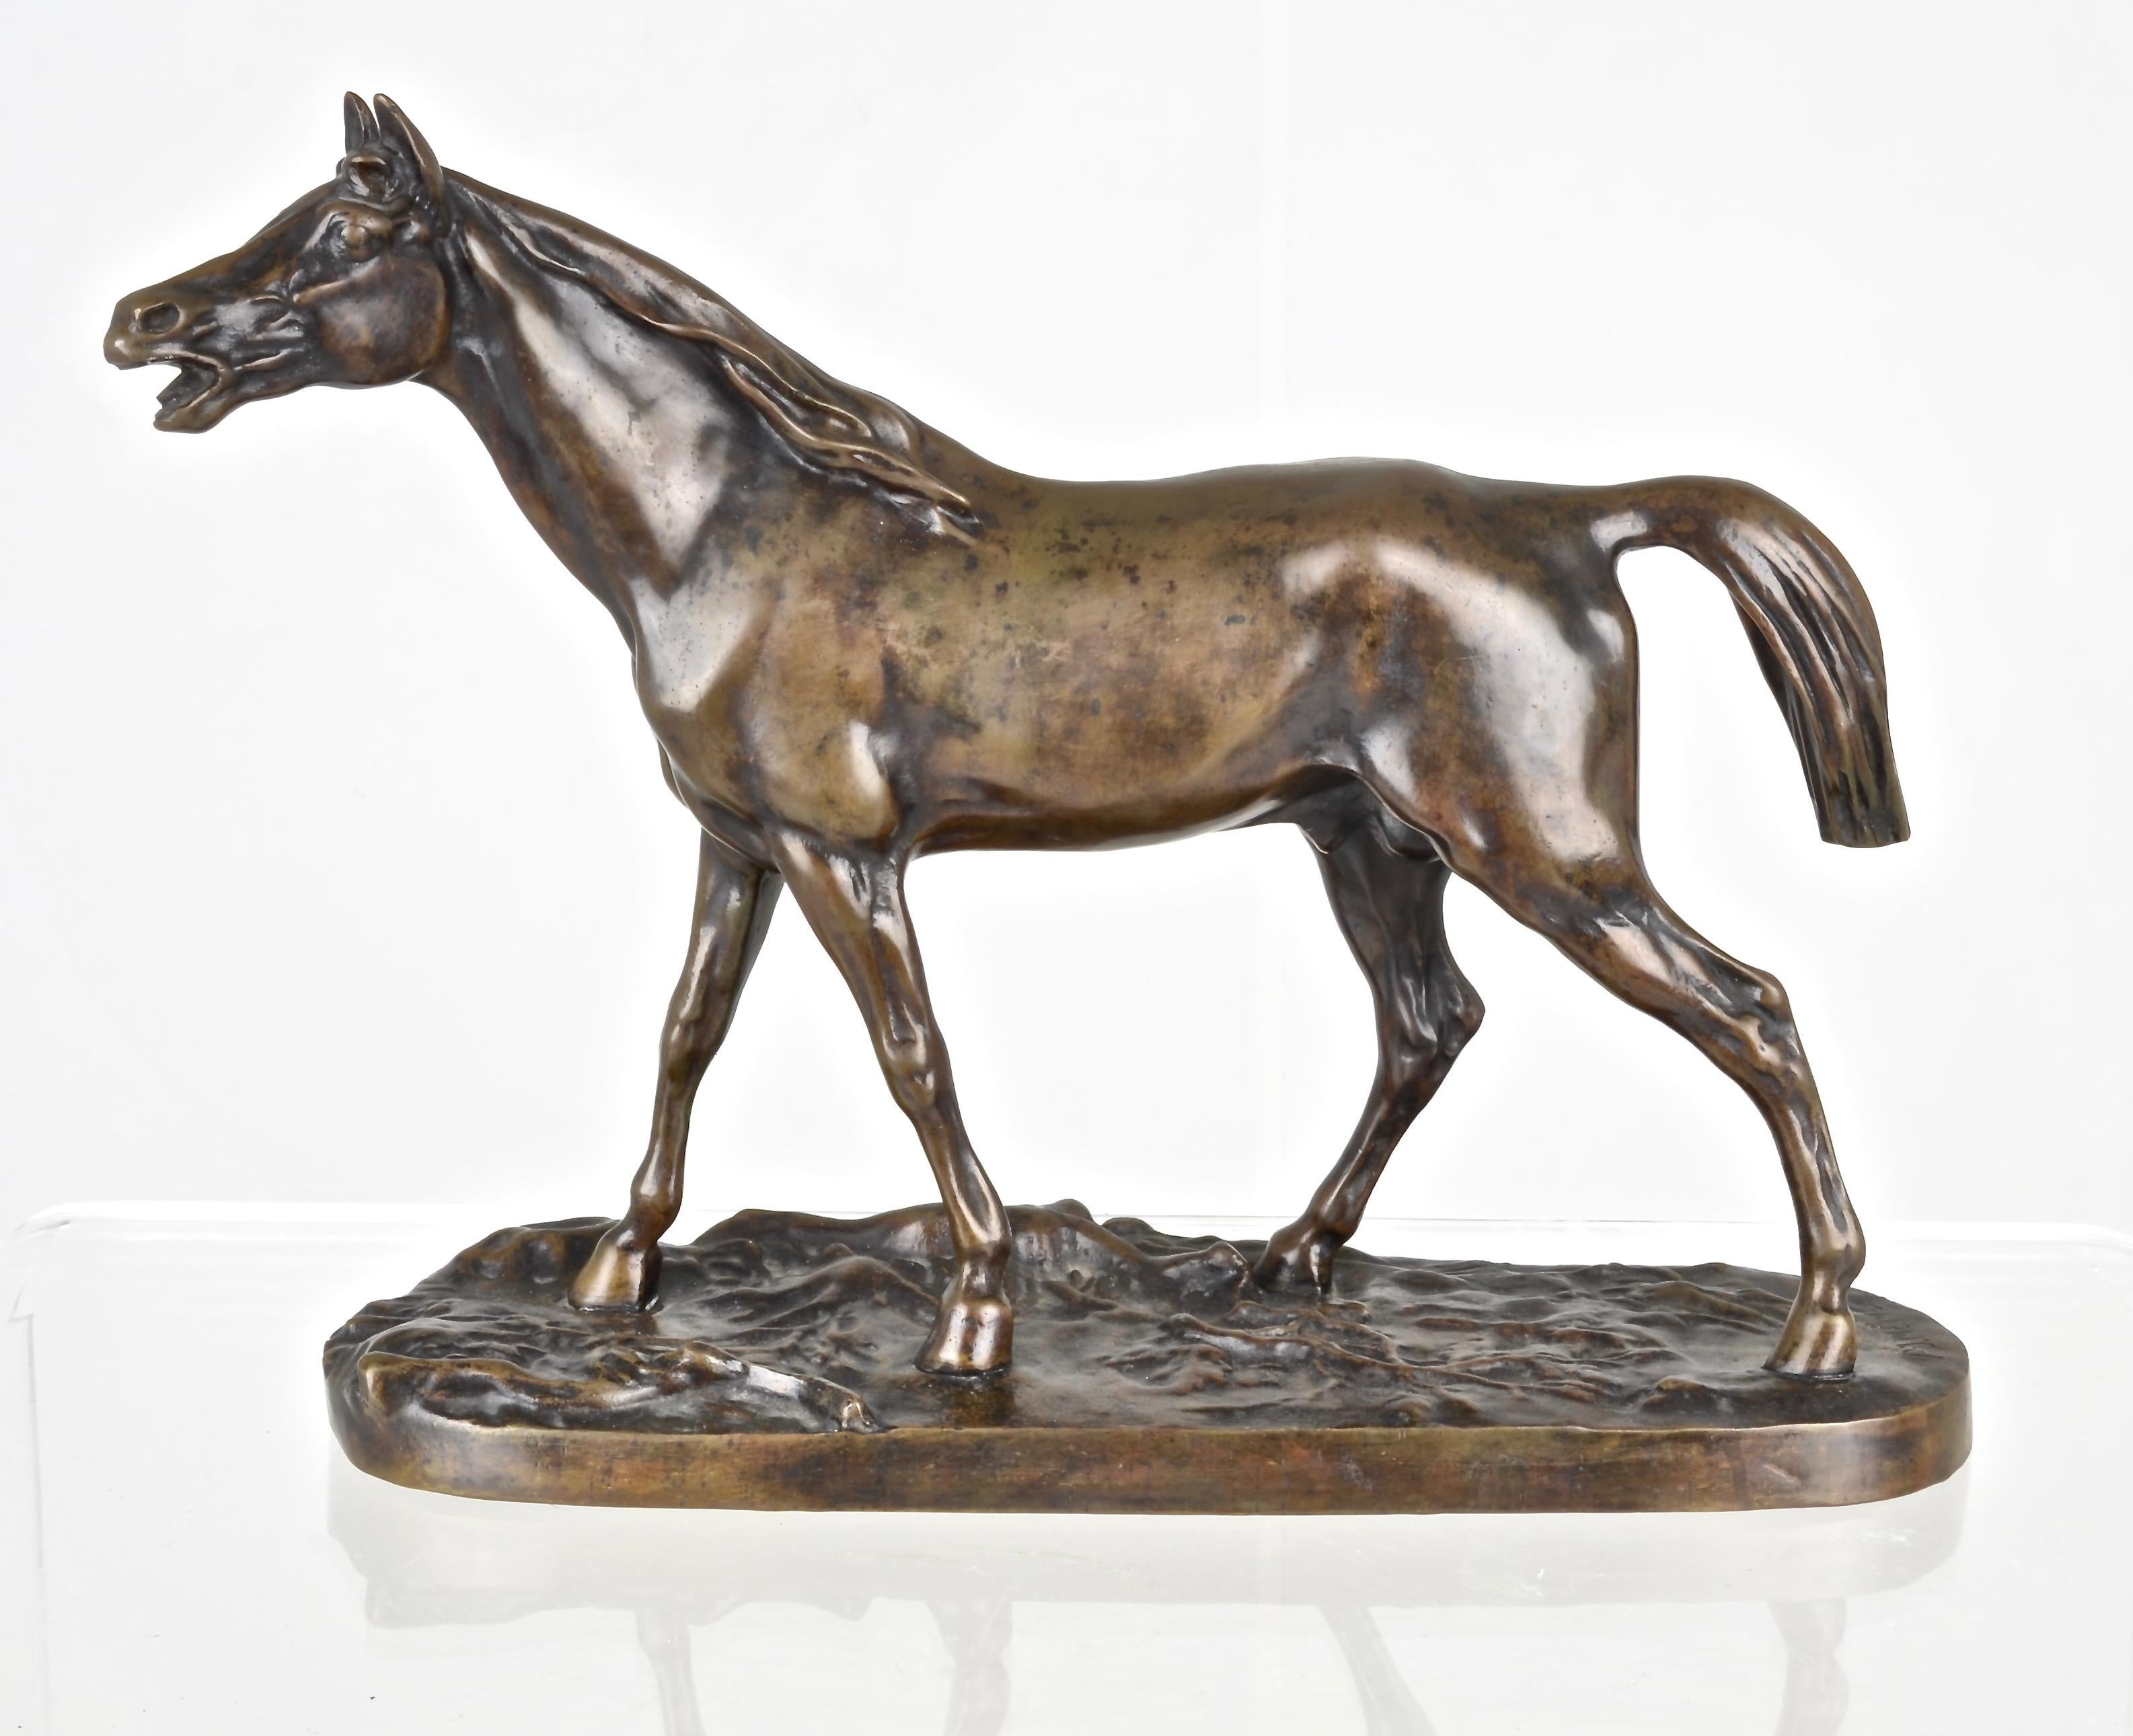 Pierre-Jules Mêne (1810-1879) was a French sculptor known for animal sculptures. This work of a walking stallion has exceptional quality of casting and patina. It also features the characteristic mid-19th c square nuts on the underside. Note in